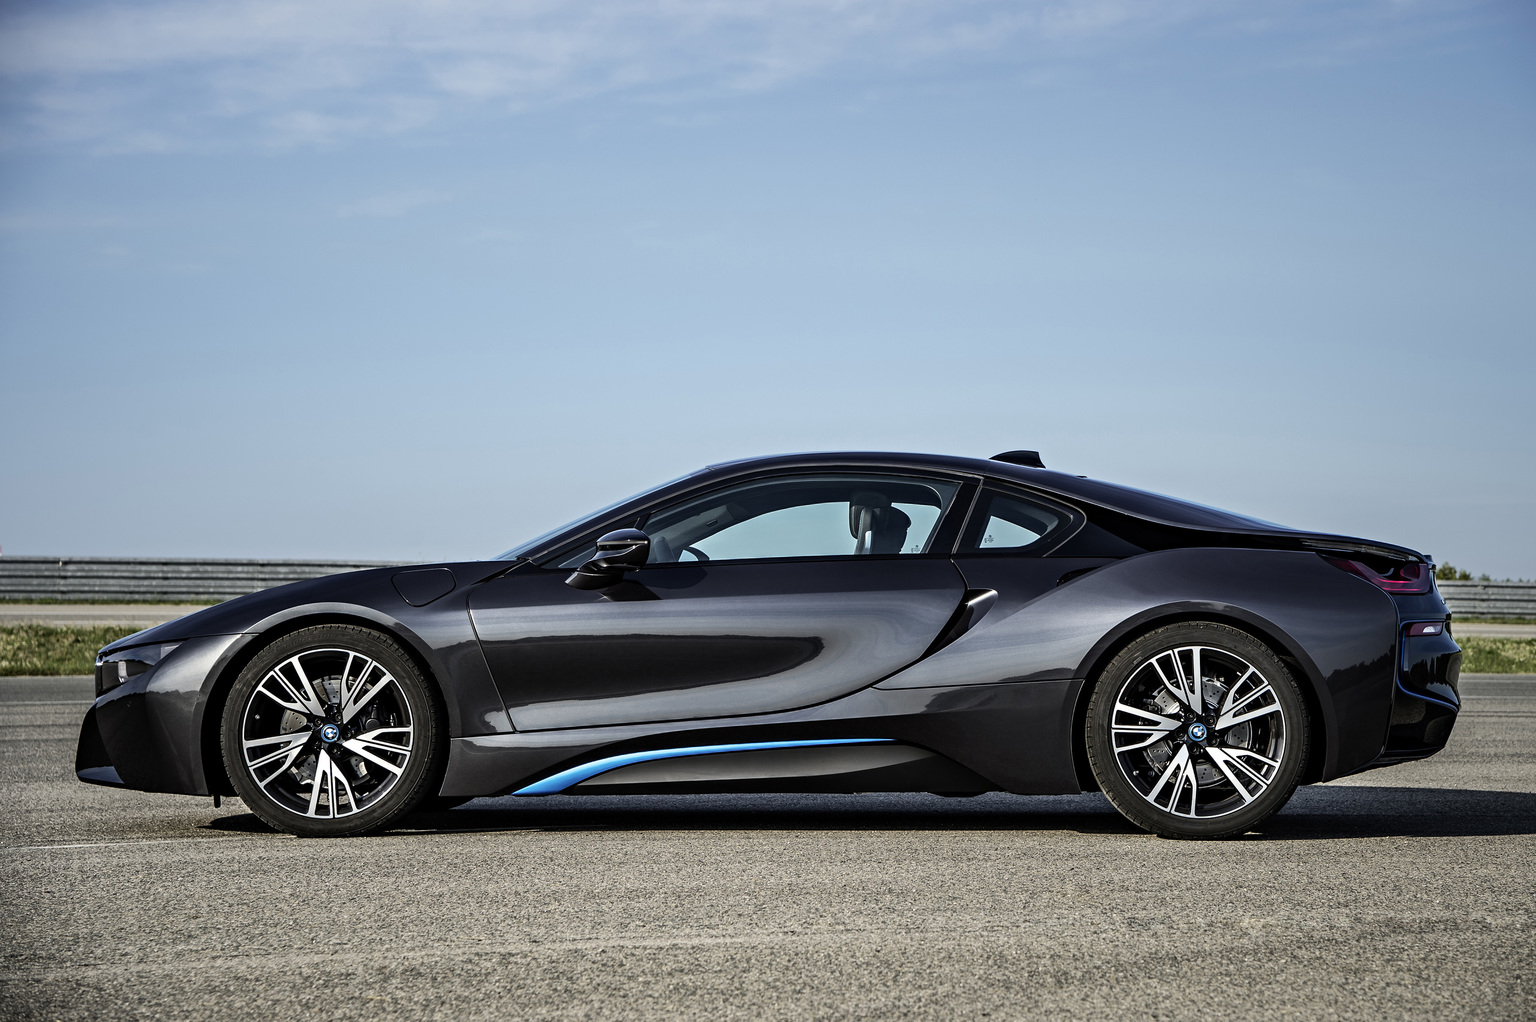 BMW i8 (2014 - Present): Profile, Specifications, Reviews & Buyer Guide